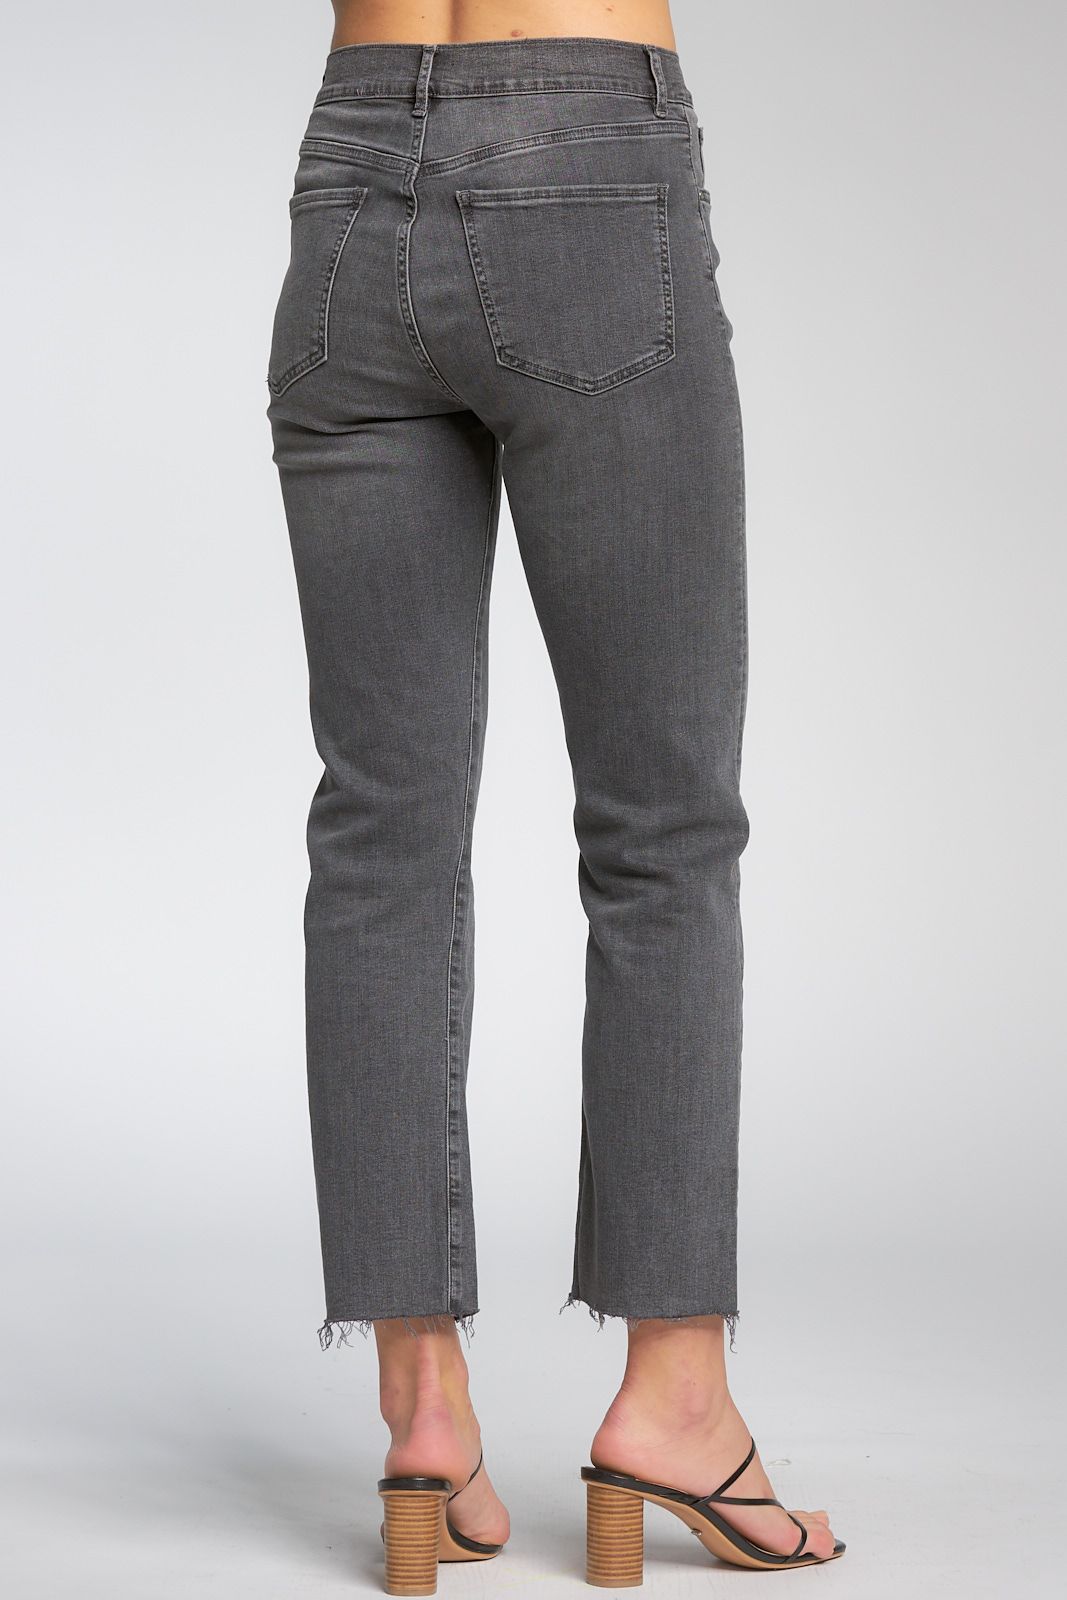 Straight Cut Jeans | Grey - Main Image Number 3 of 3